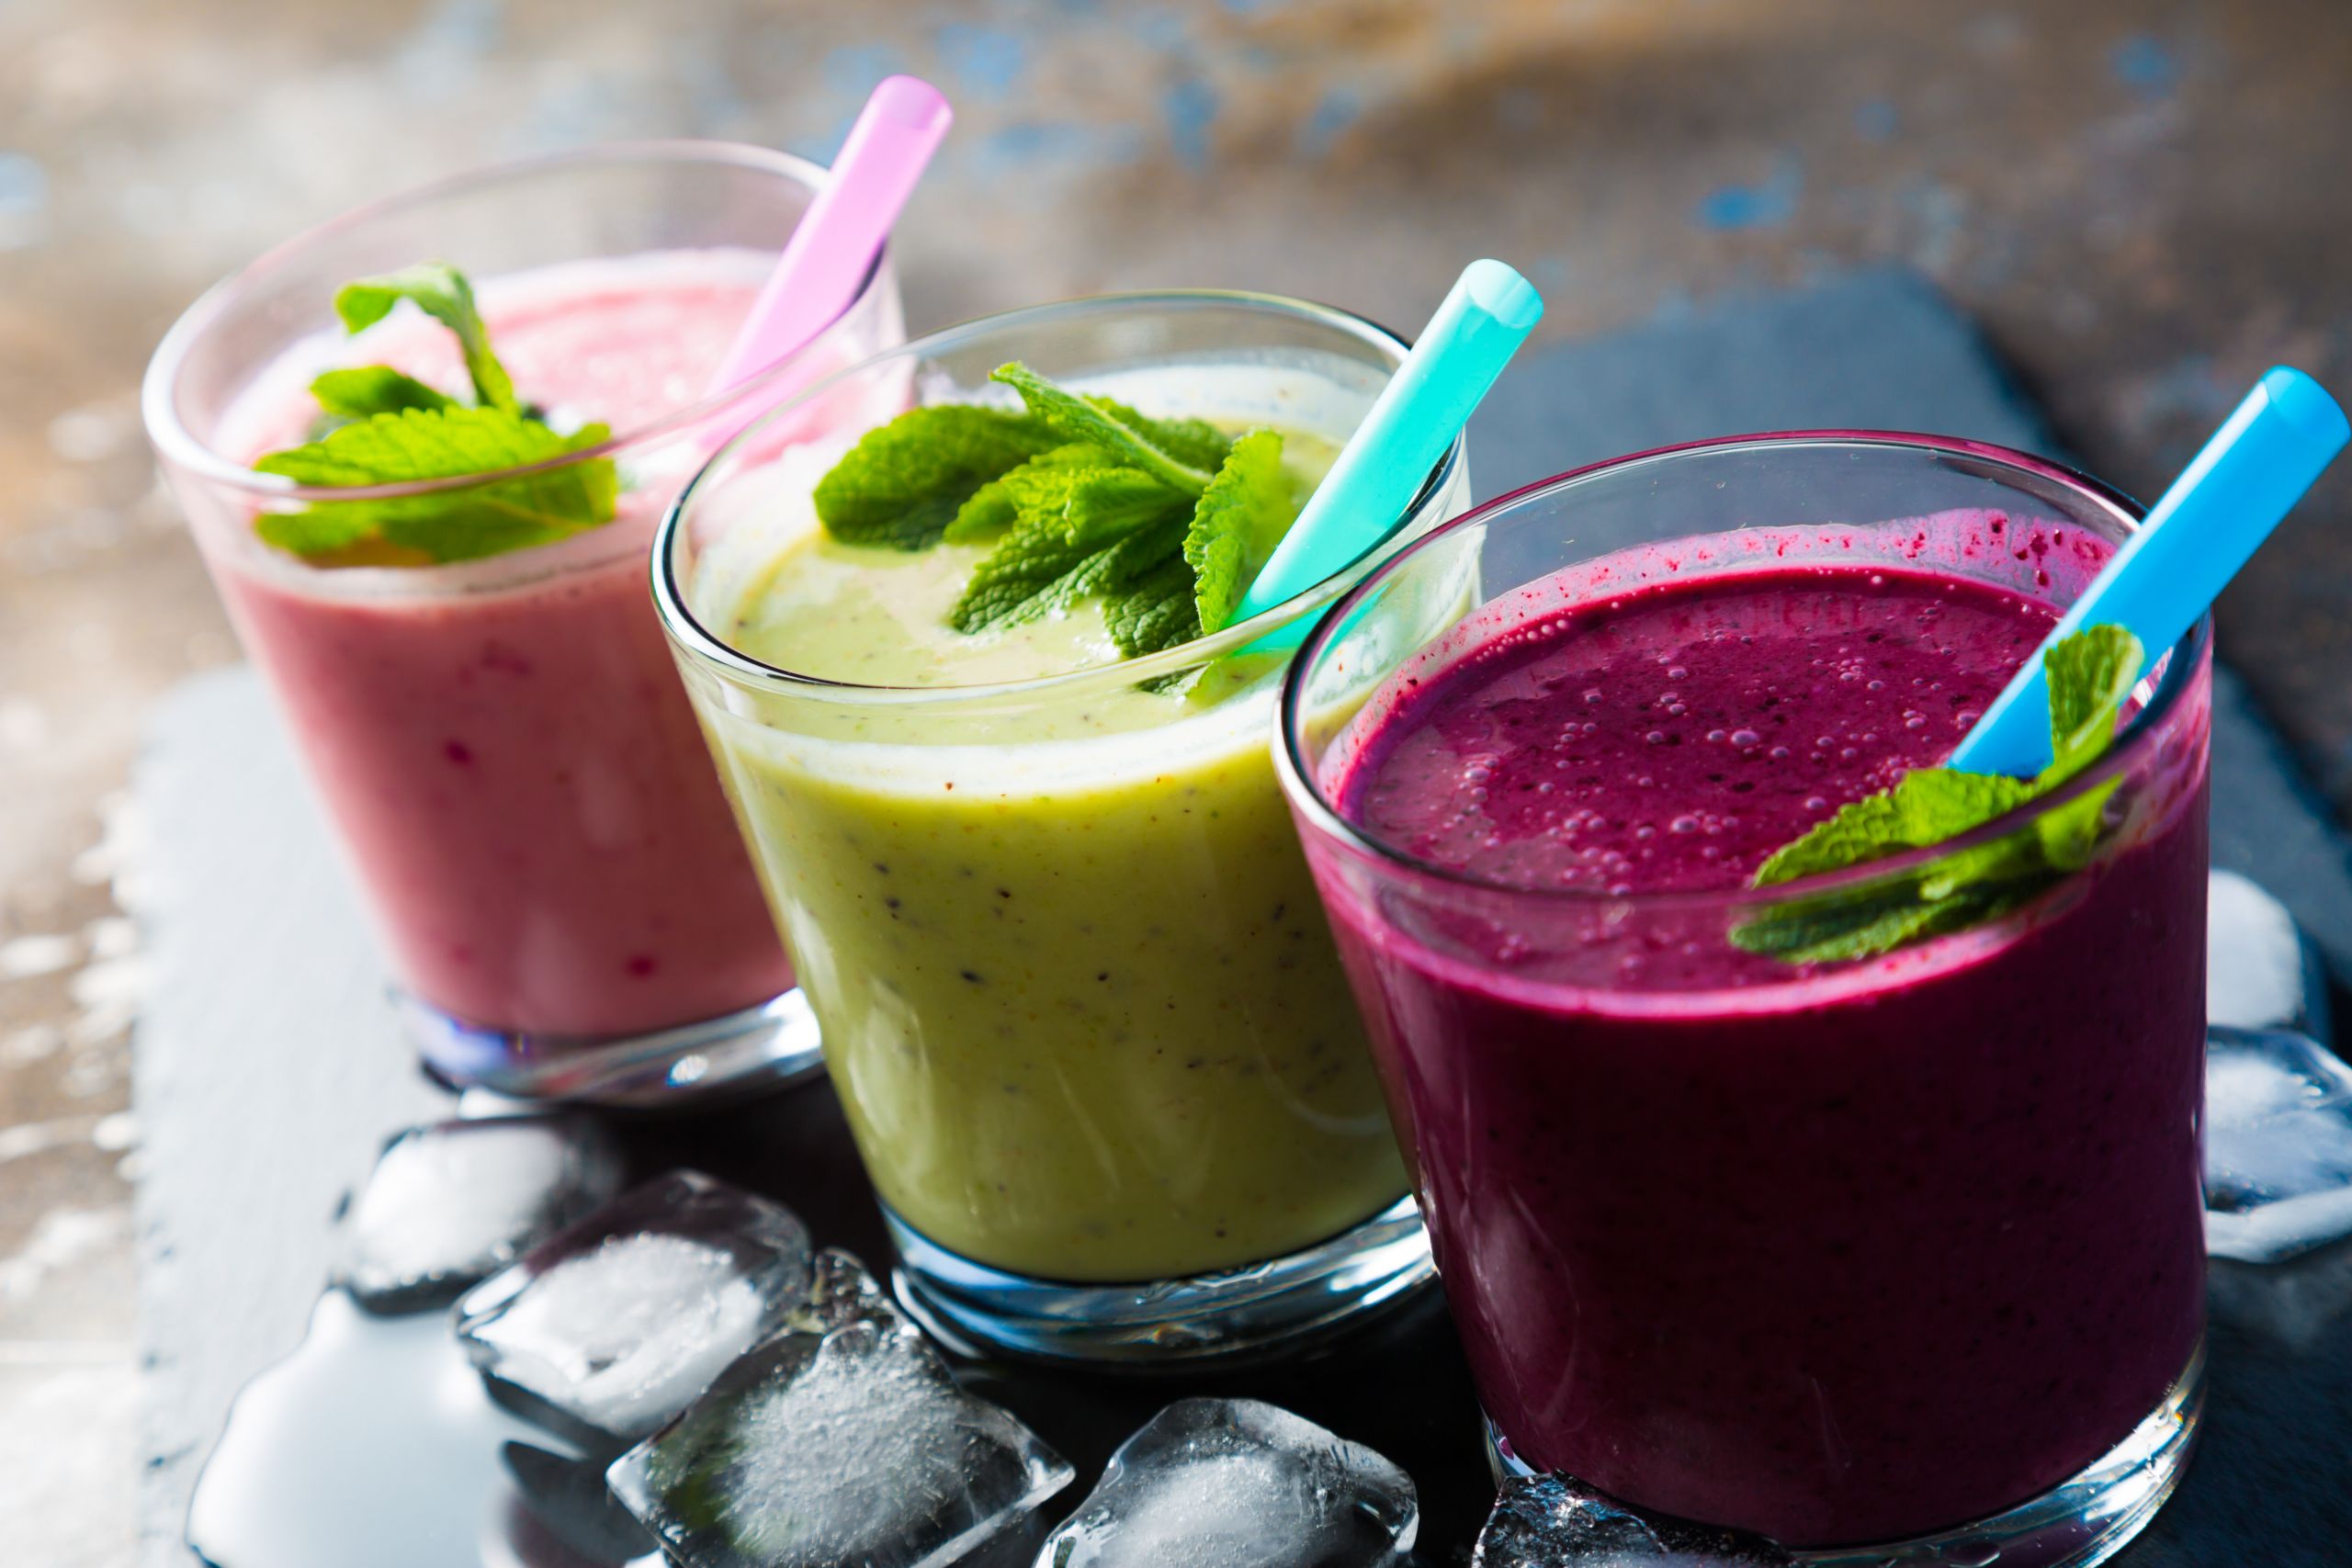 Blender Smoothie Recipes
 6 Healthy & Delicious Recipes for Blender Smoothies Soups